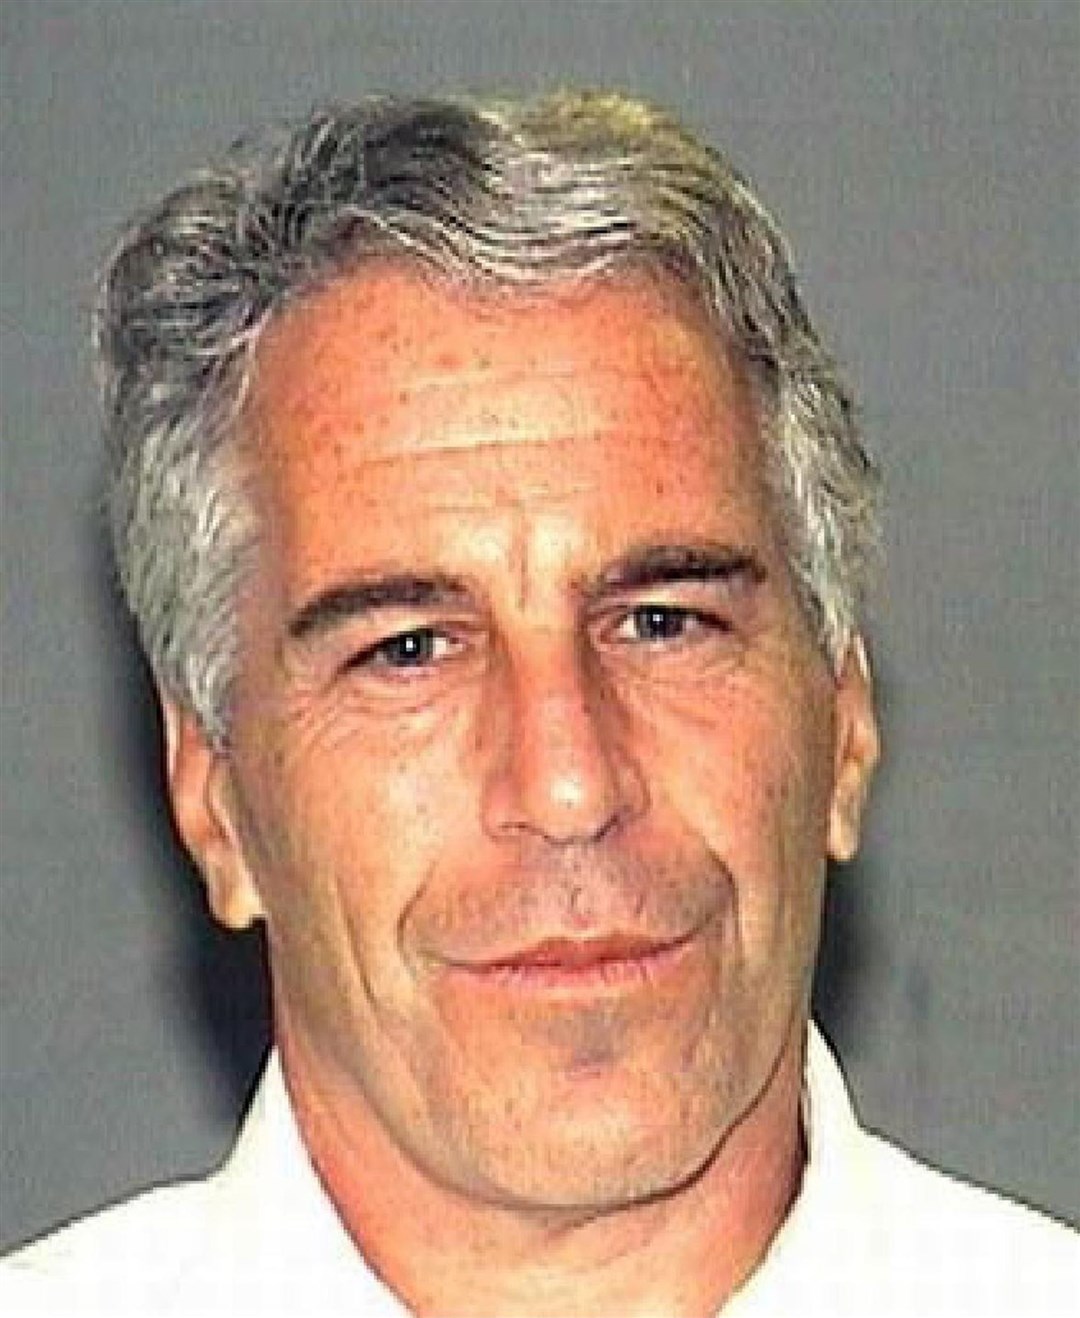 Epstein was found dead while awaiting trial on sex-trafficking charges (US Department of Justice/PA)